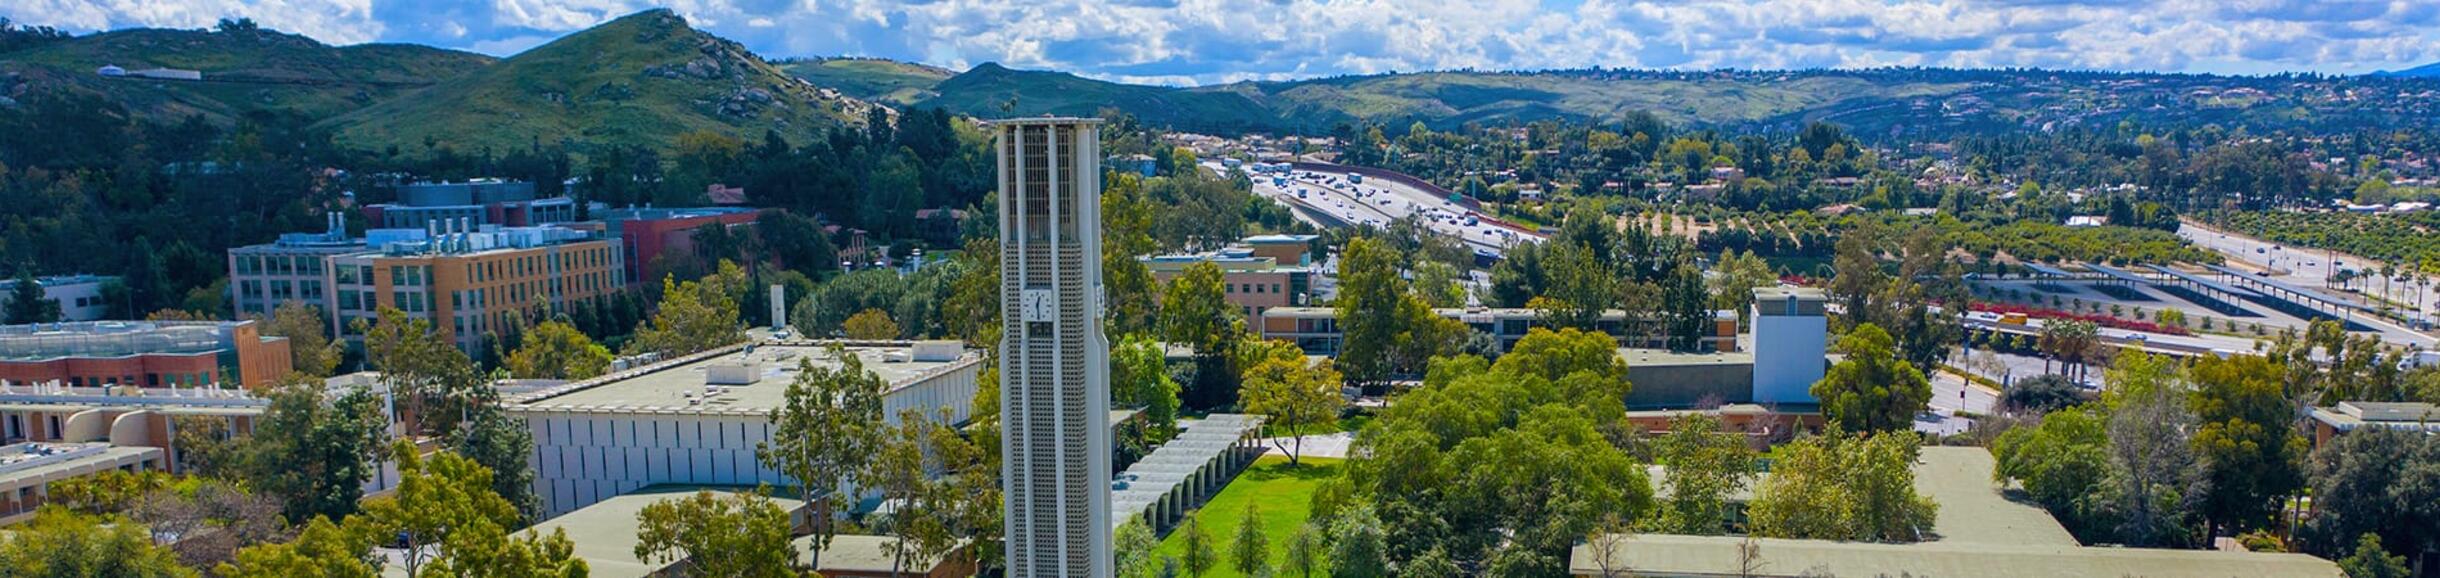 Aerial shot of UC Riverside Campus with the Bell Tower